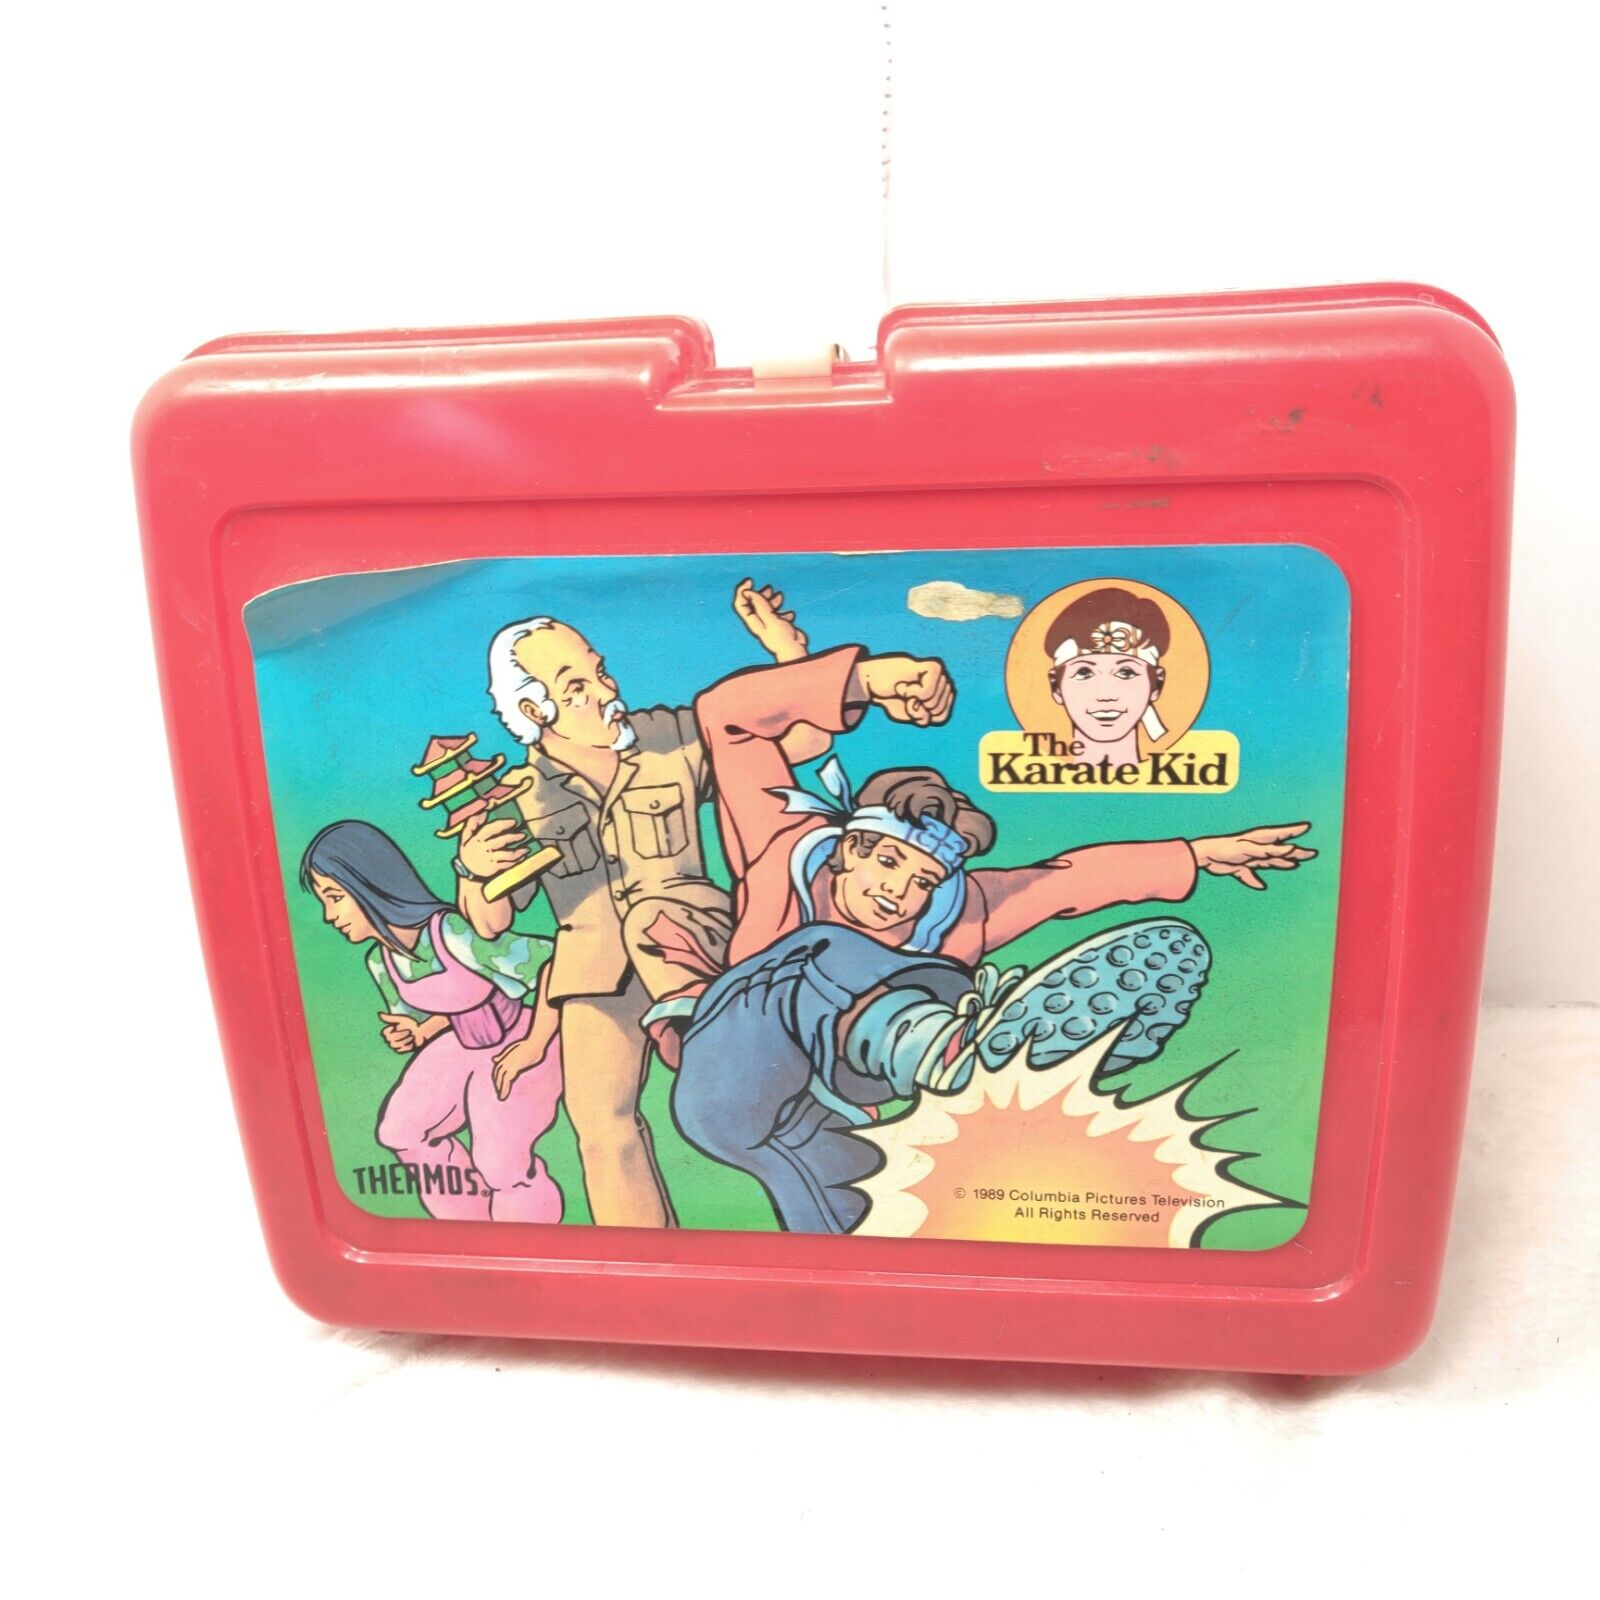 RARE 1989 Karate Kid Thermos brand Lunch Box only Cartoon Show Lunchbox